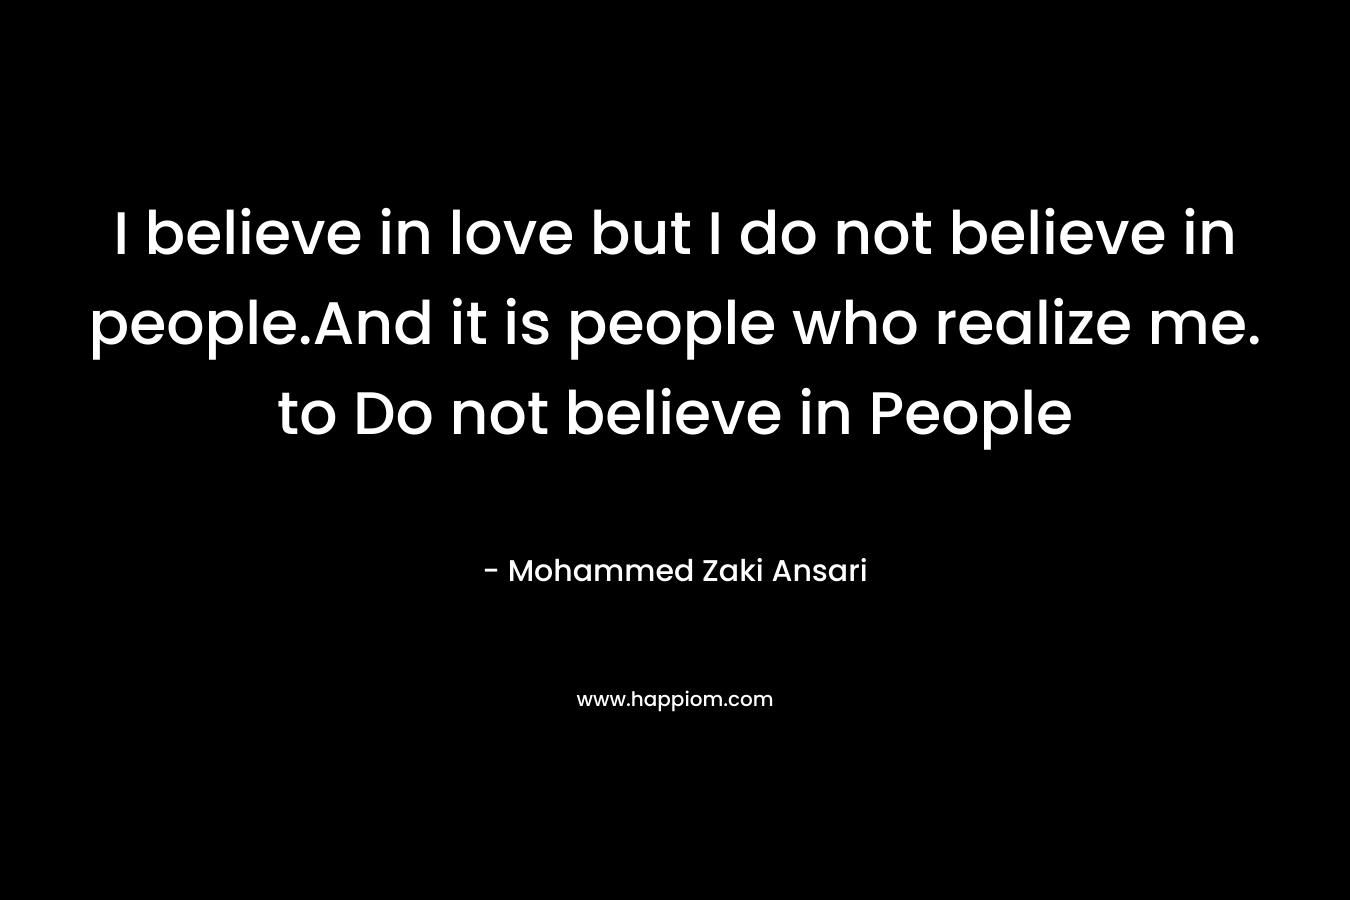 I believe in love but I do not believe in people.And it is people who realize me. to Do not believe in People